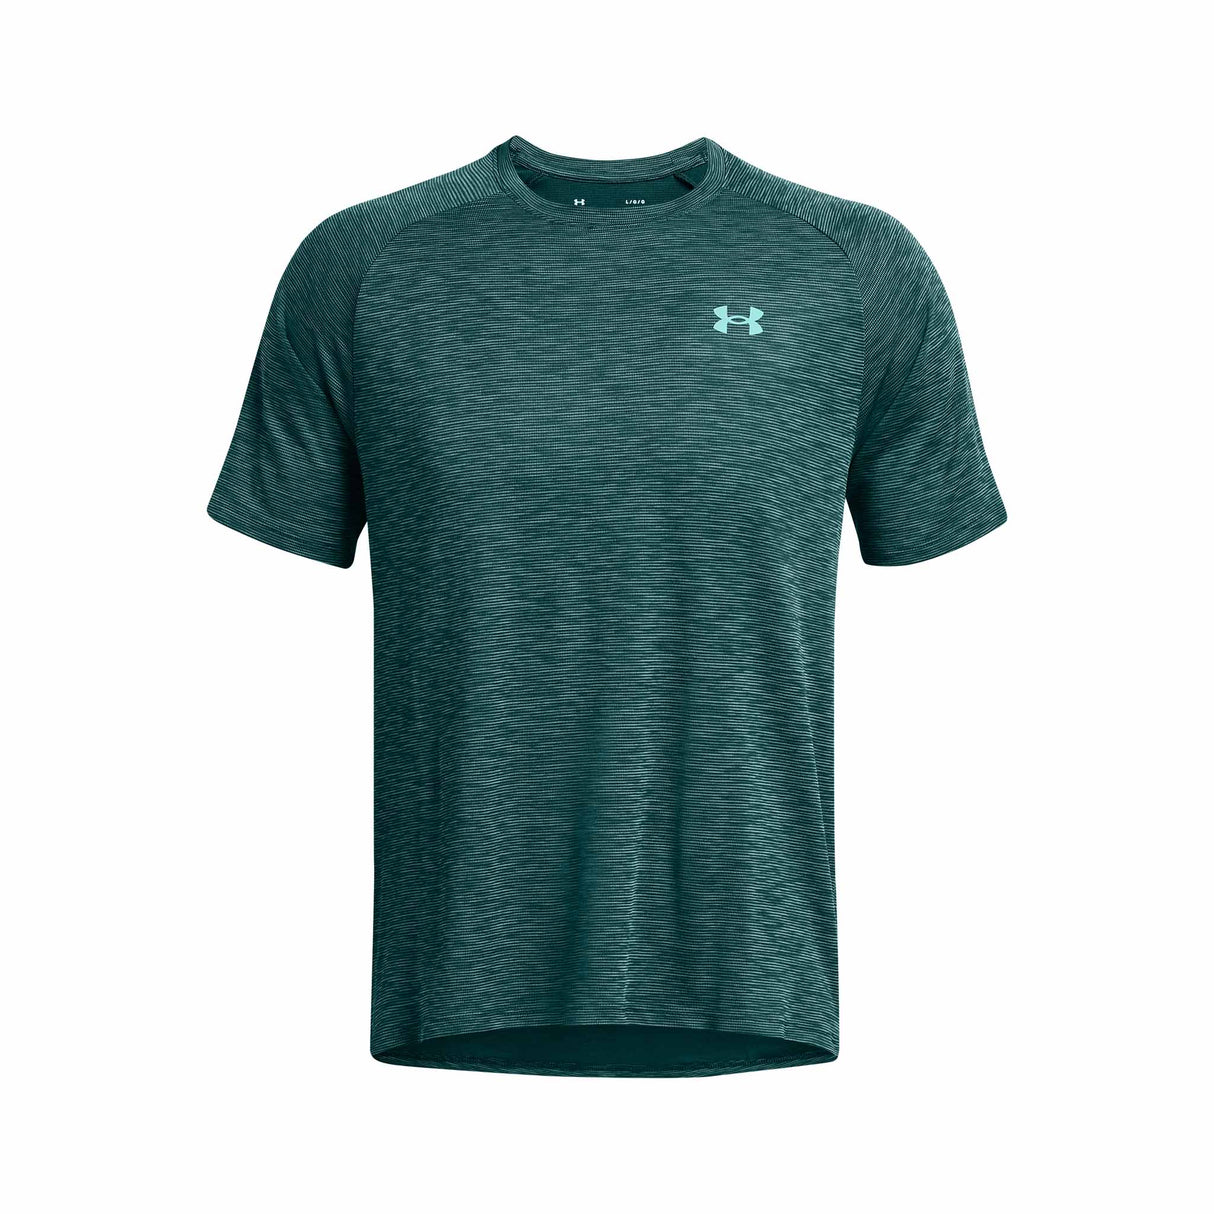 Under Armour Tech T-shirt sport homme -Hydro Teal / Radial Turquoise